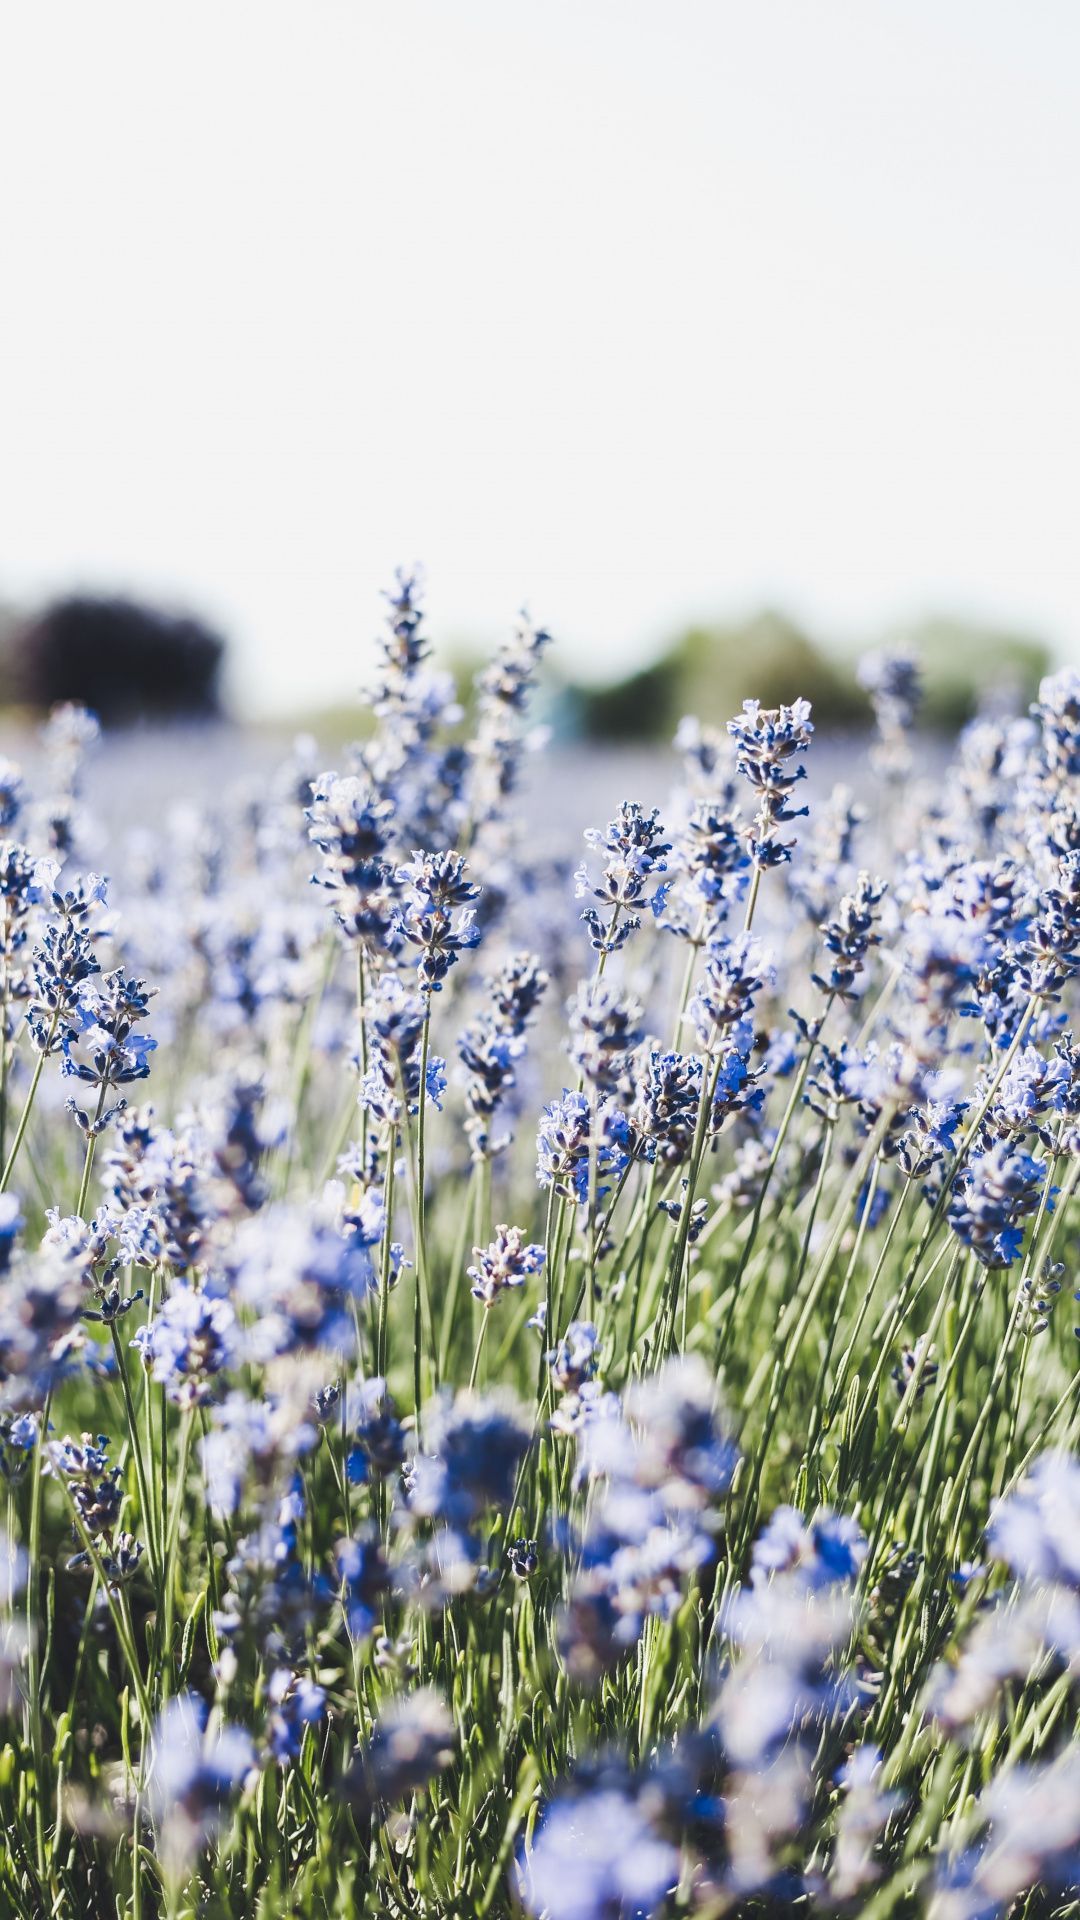 A field of flowers with blue and purple petals - Spring